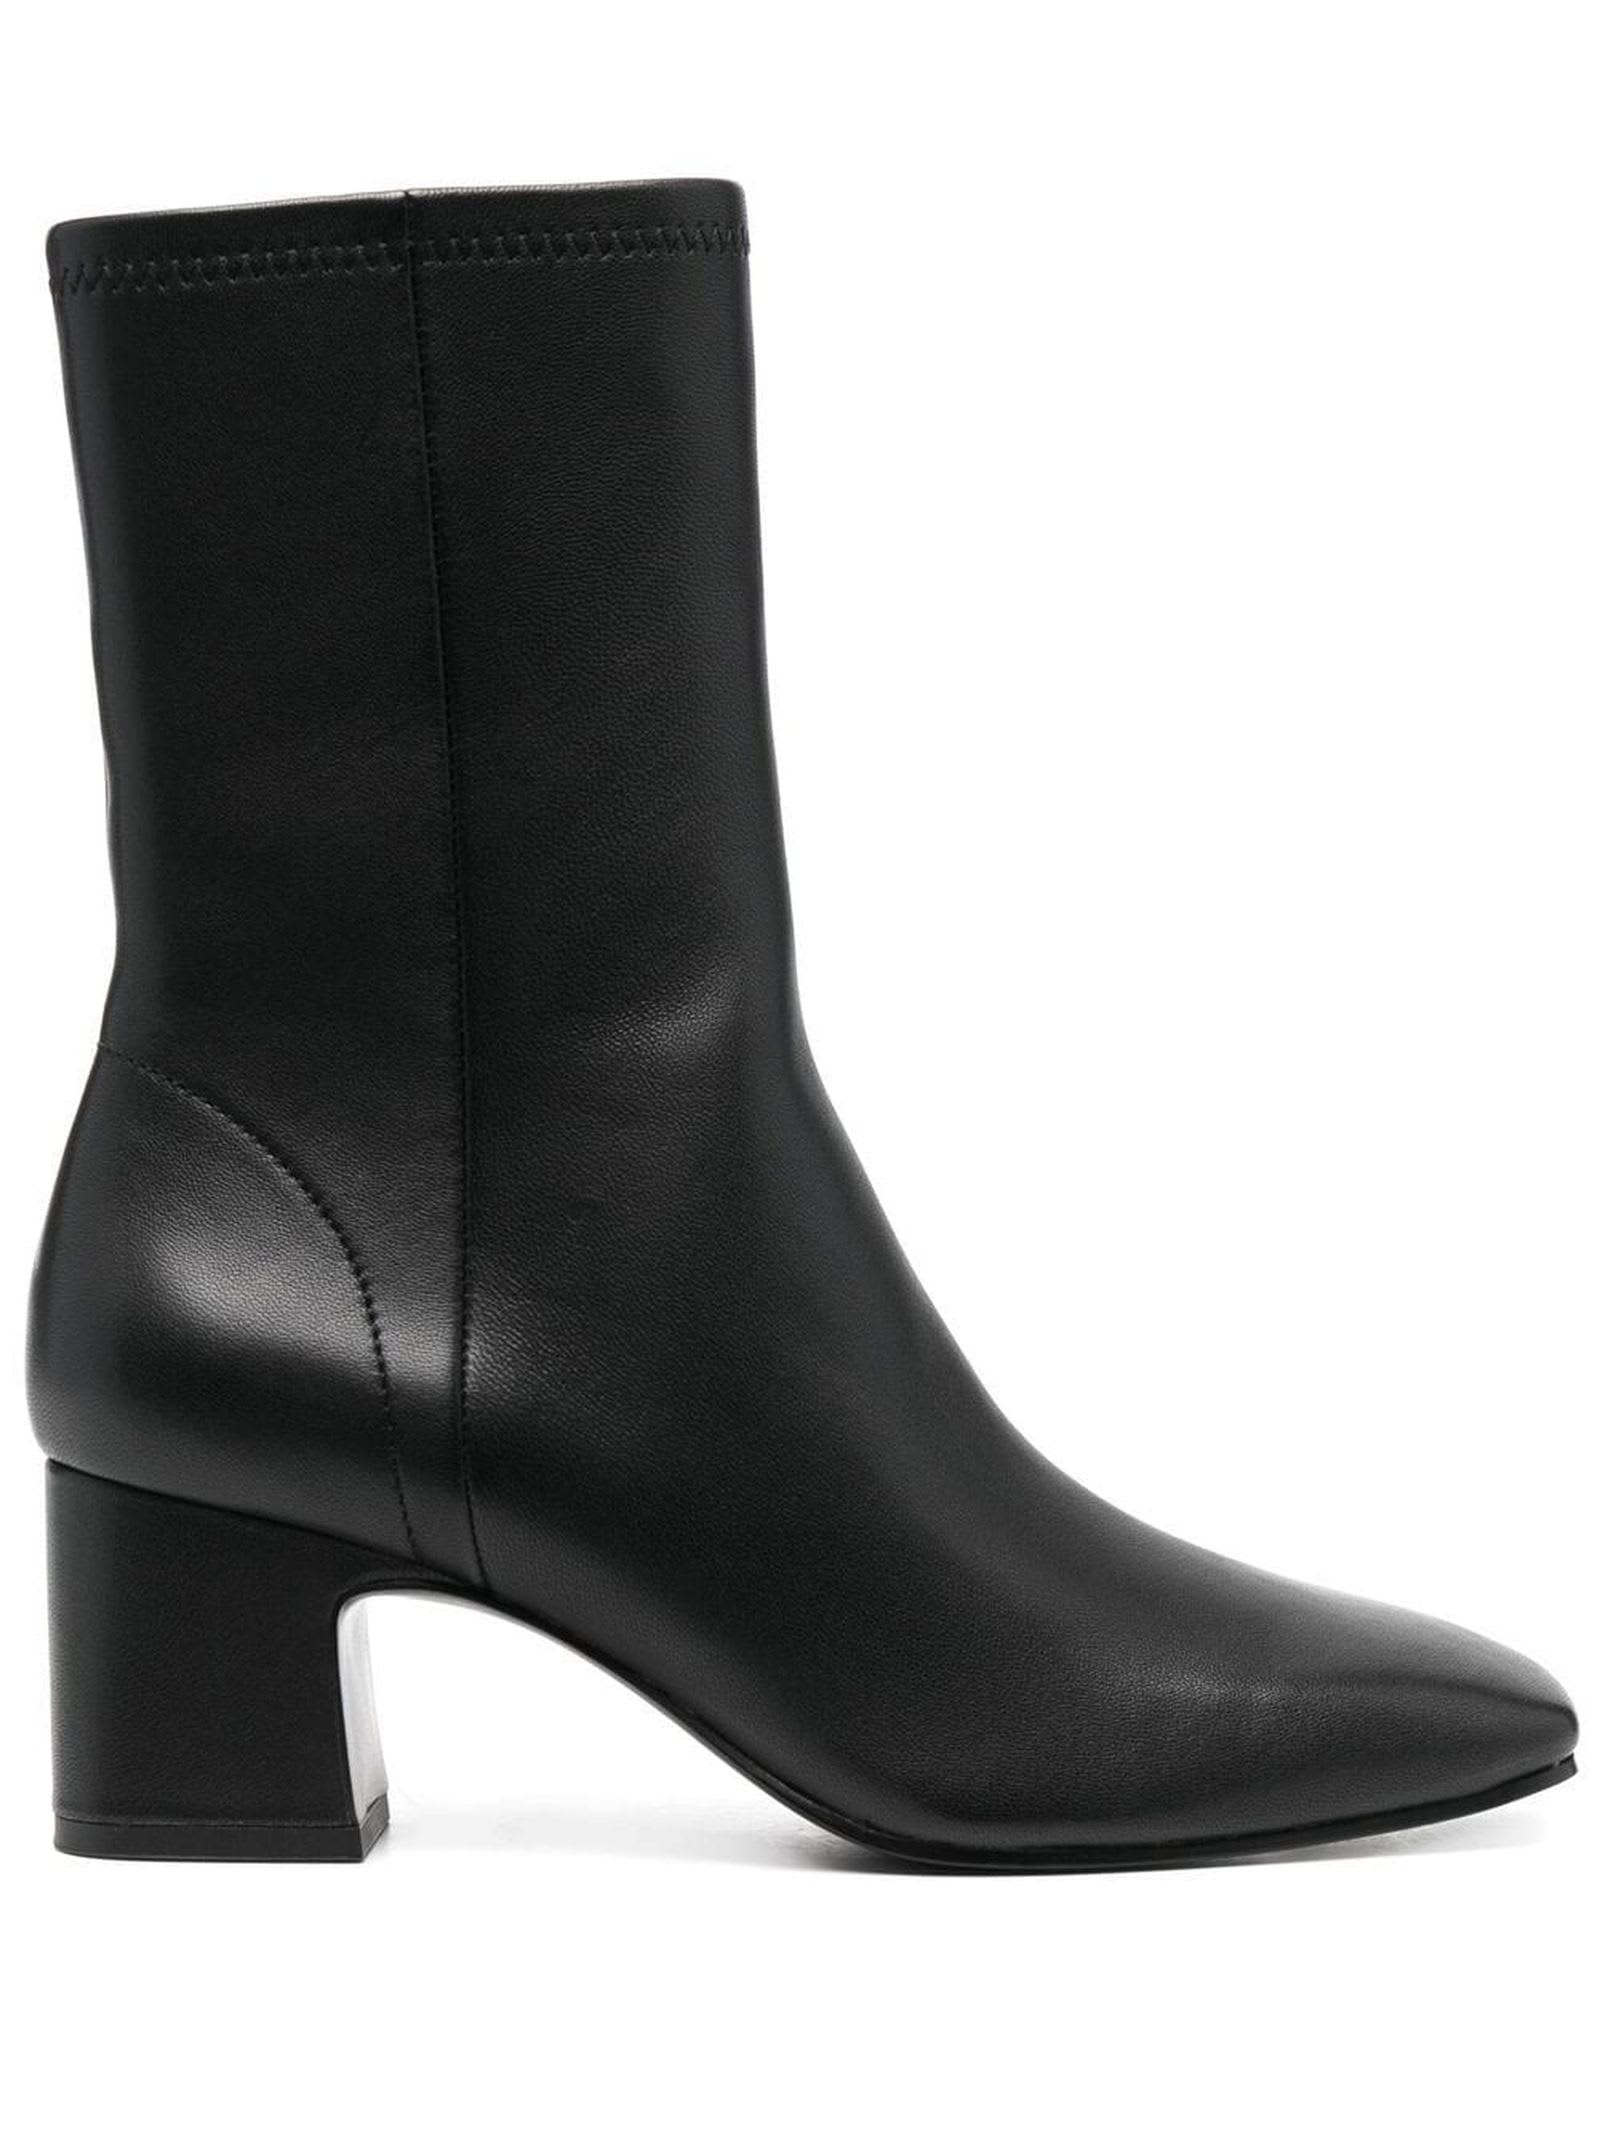 Ash Black Calf Leather Cindy Ankle Boots